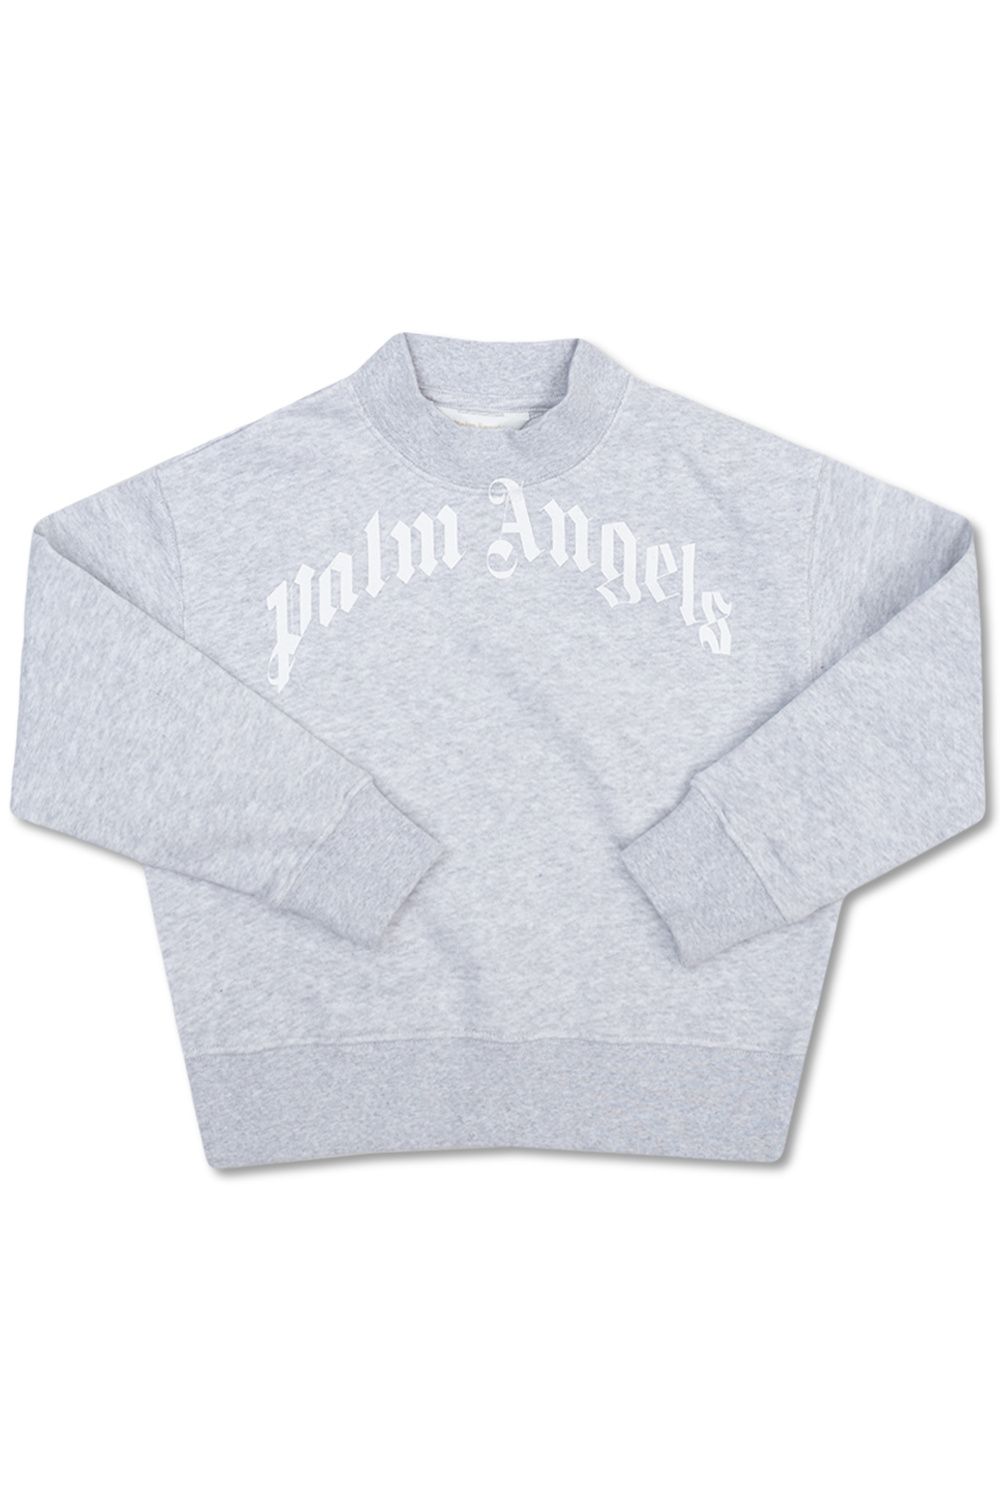 Palm Angels Kids knit rib sweater zadig voltaire pullover encre